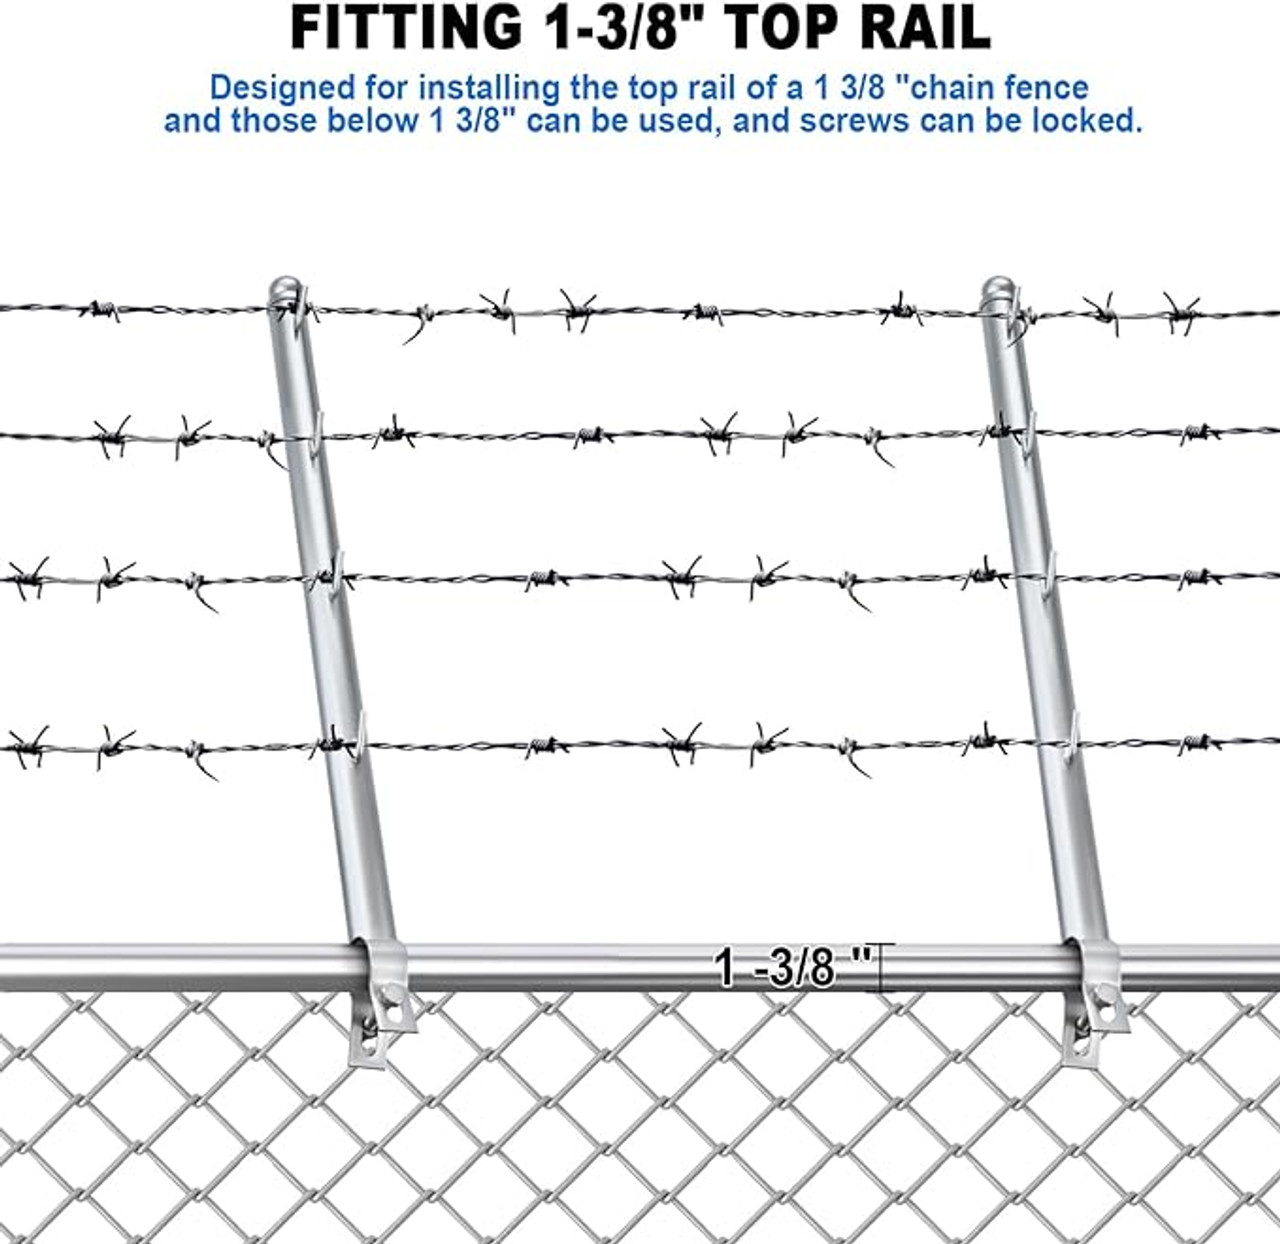 10 Pack Barbwire Arm Extensions for Chain Link Fence, 25" Barbed Wire Extend Arm for 1-3/8" Top Rail, Galvanized Steel Fence Extension with 4 Hooks